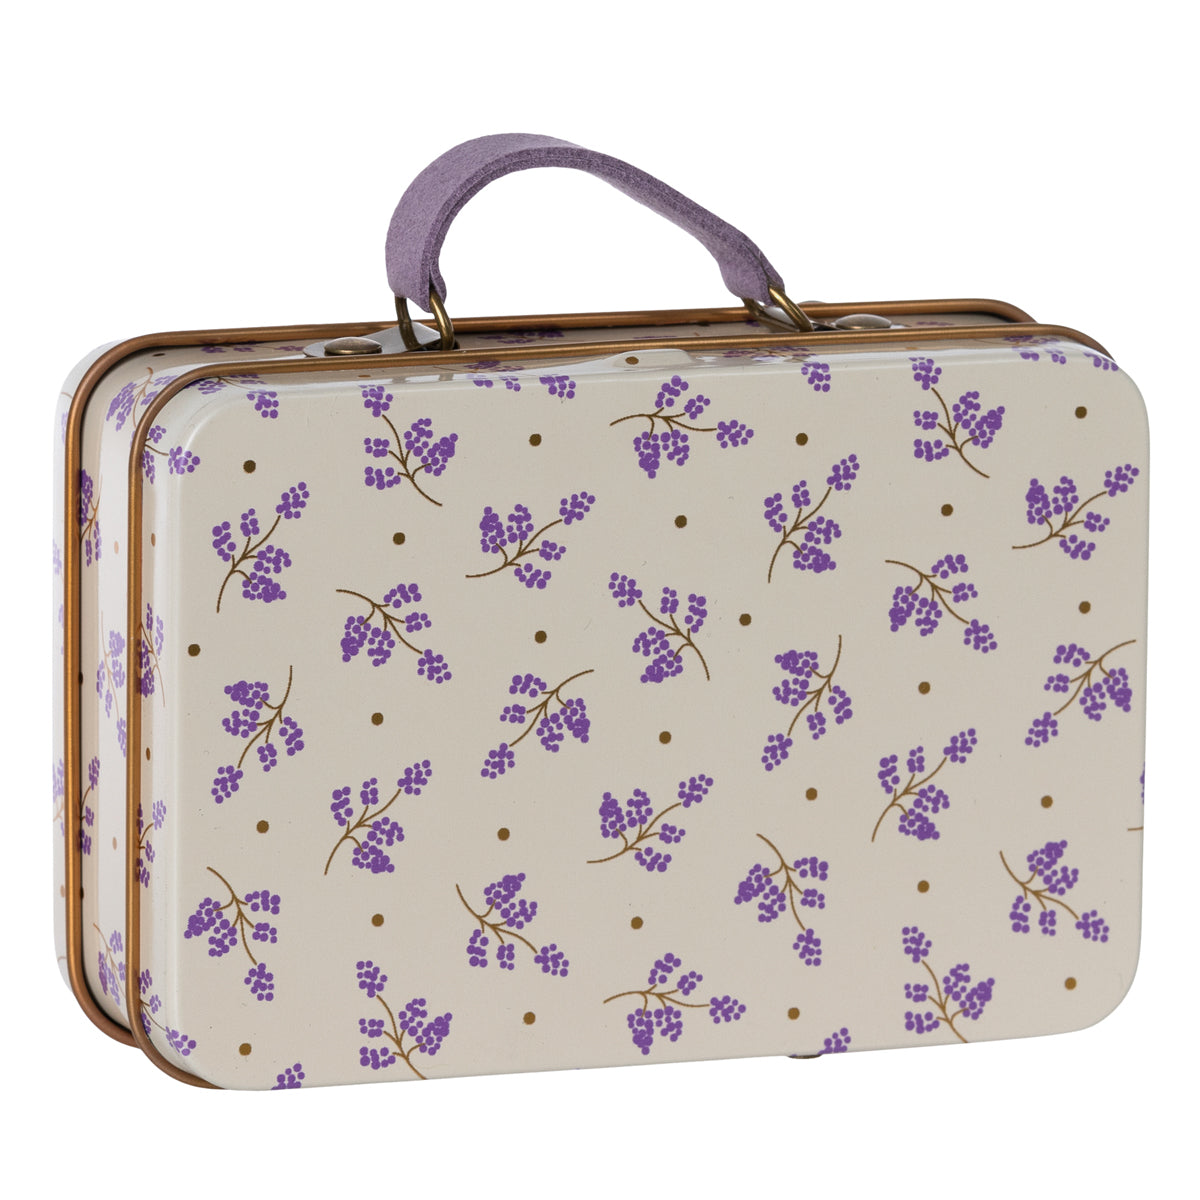 Maileg Small Suitcase, Madelaine - Lavender 19-3603-01